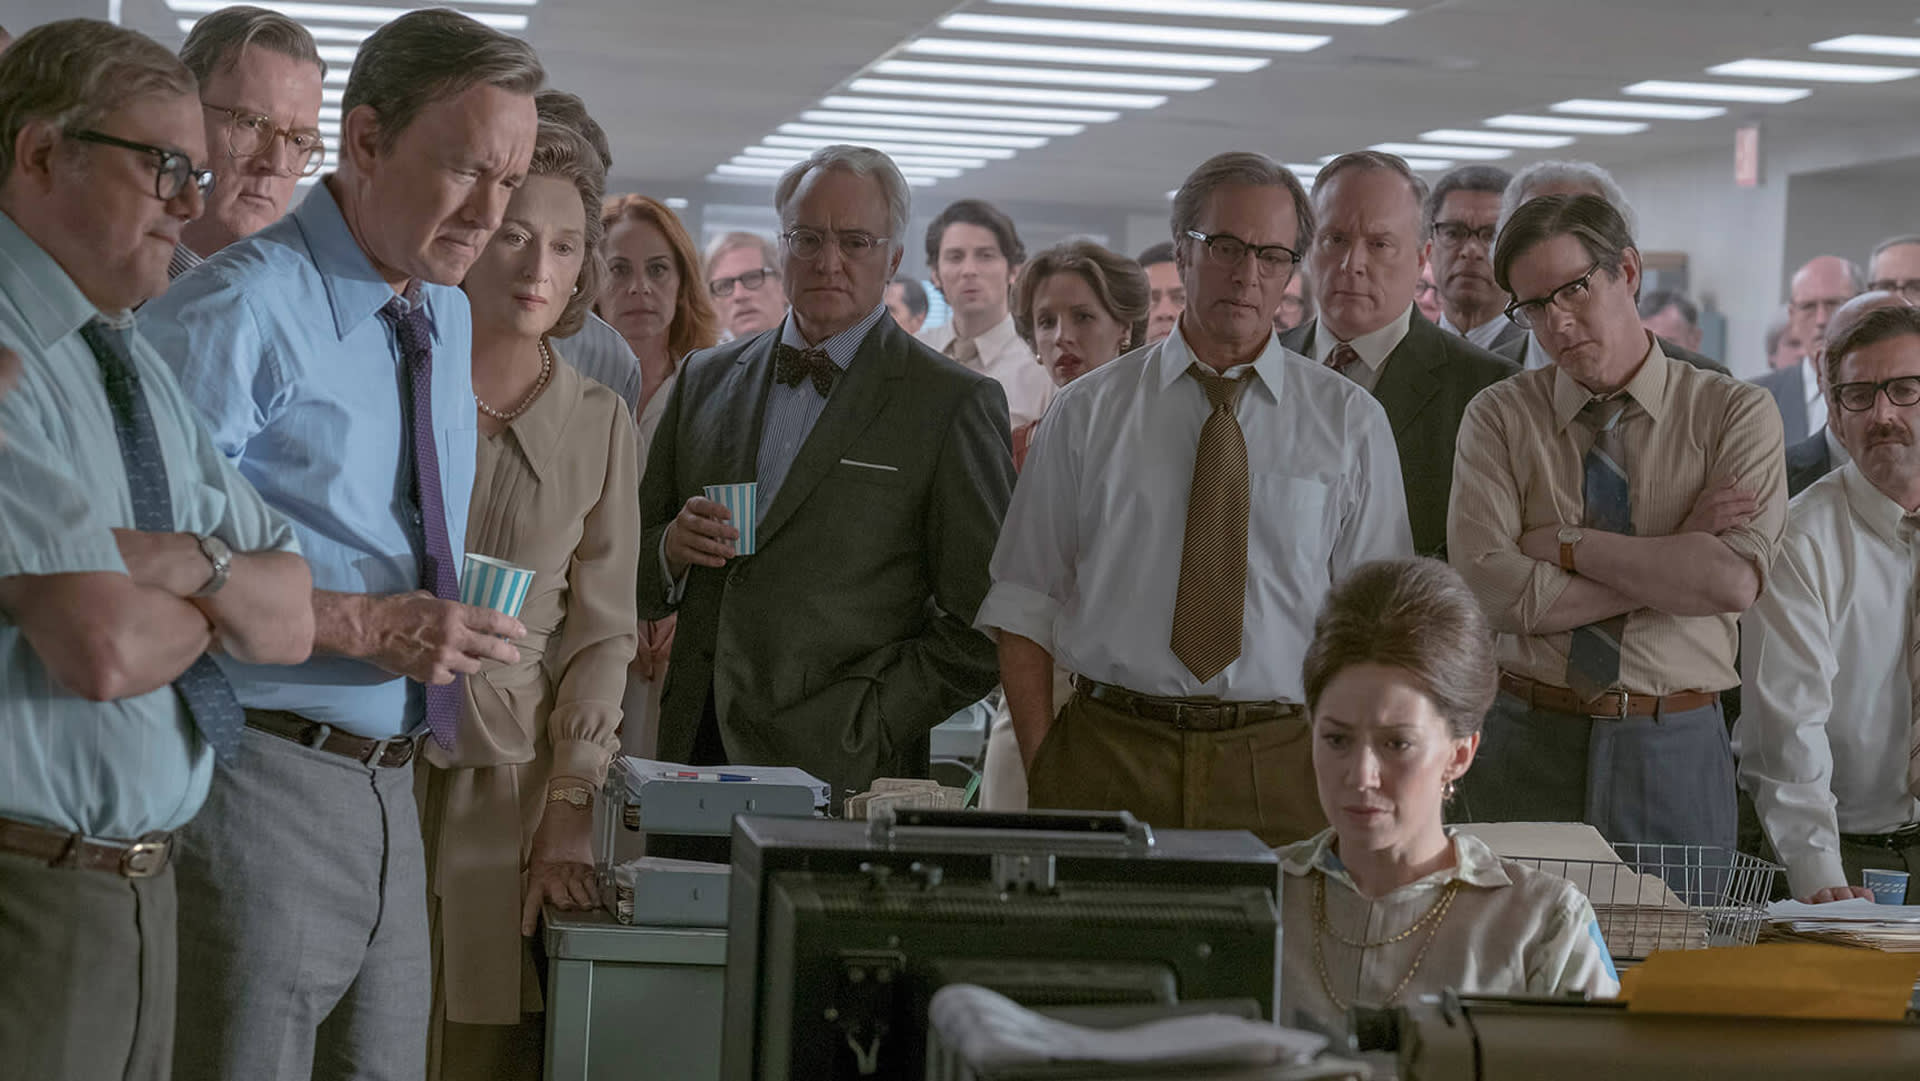 “The Post” Screenwriters On Making A Movie About Exposing Presidential Lies